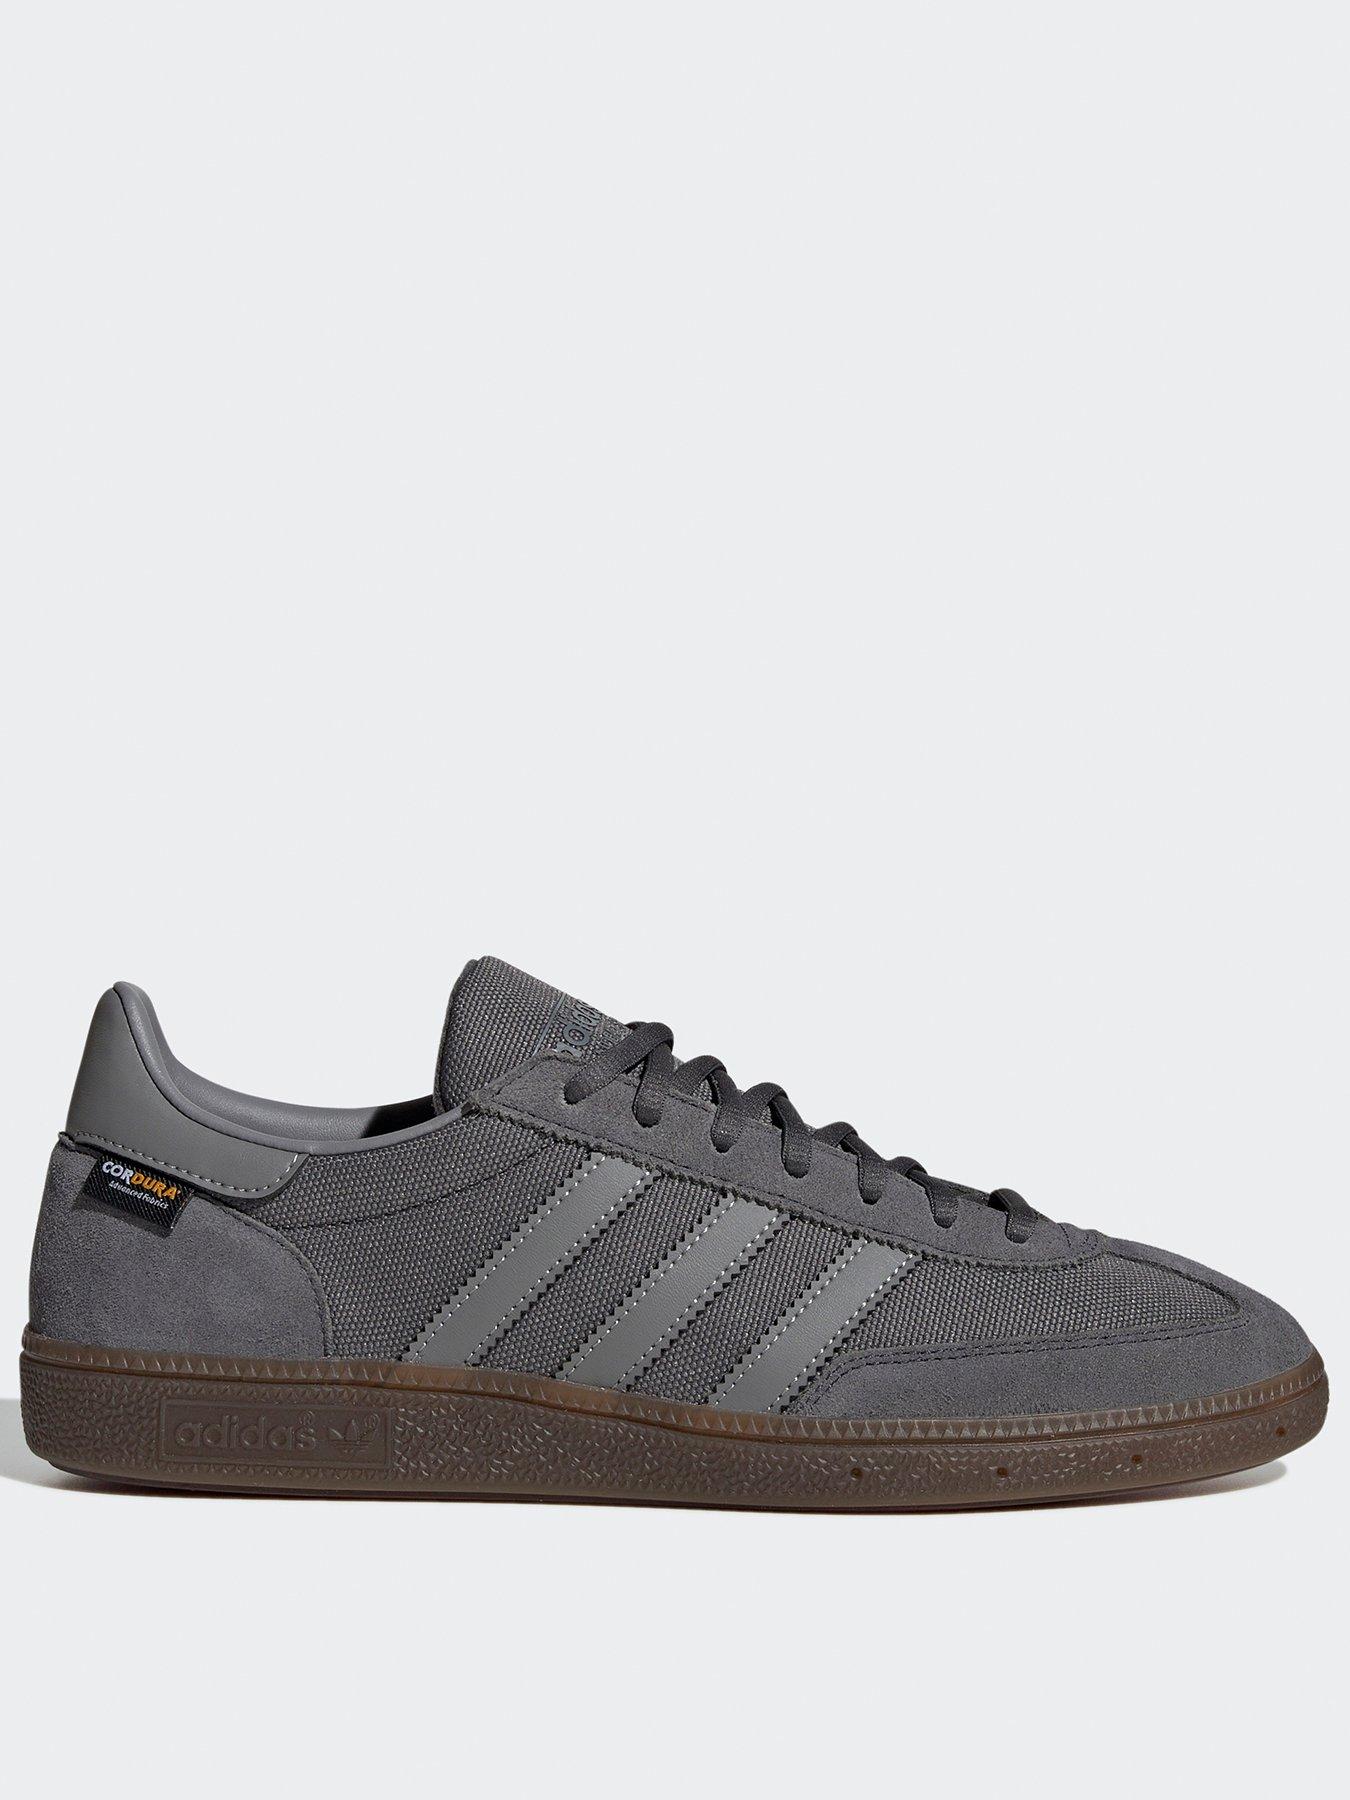 adidas adidas Store Online | Very.co.uk